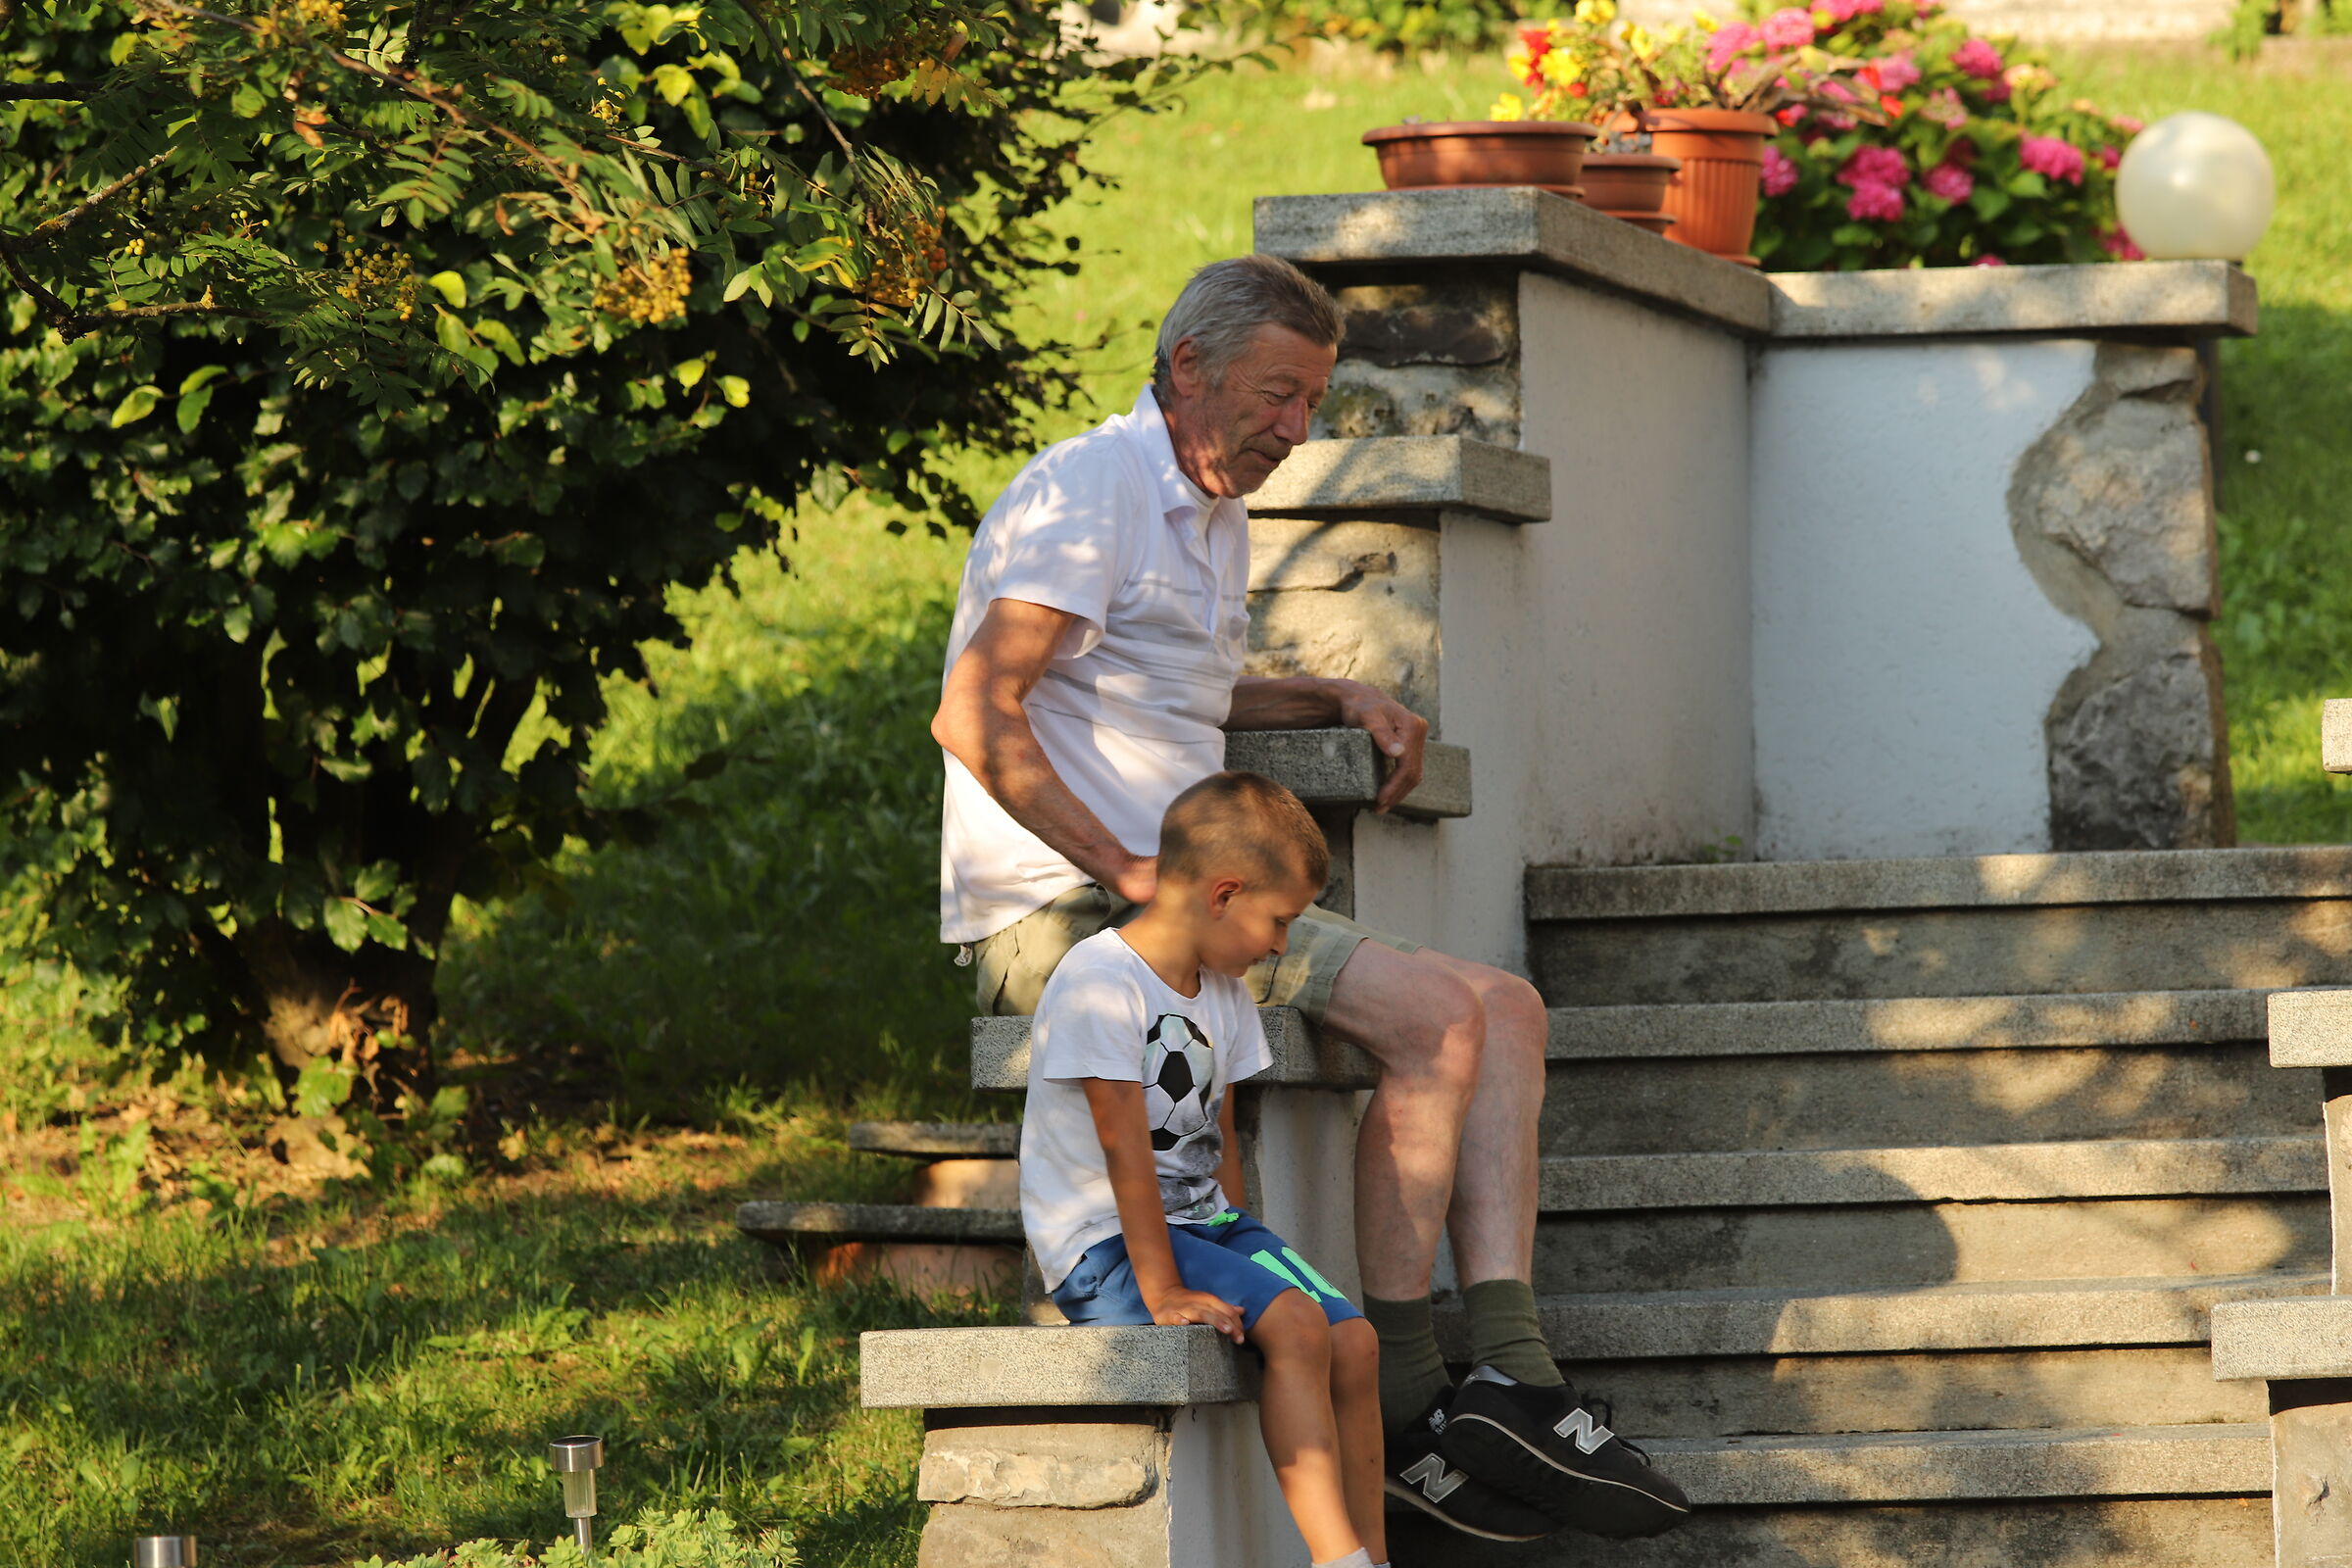 "The Old Man and the Child" (by F. Guccini)...